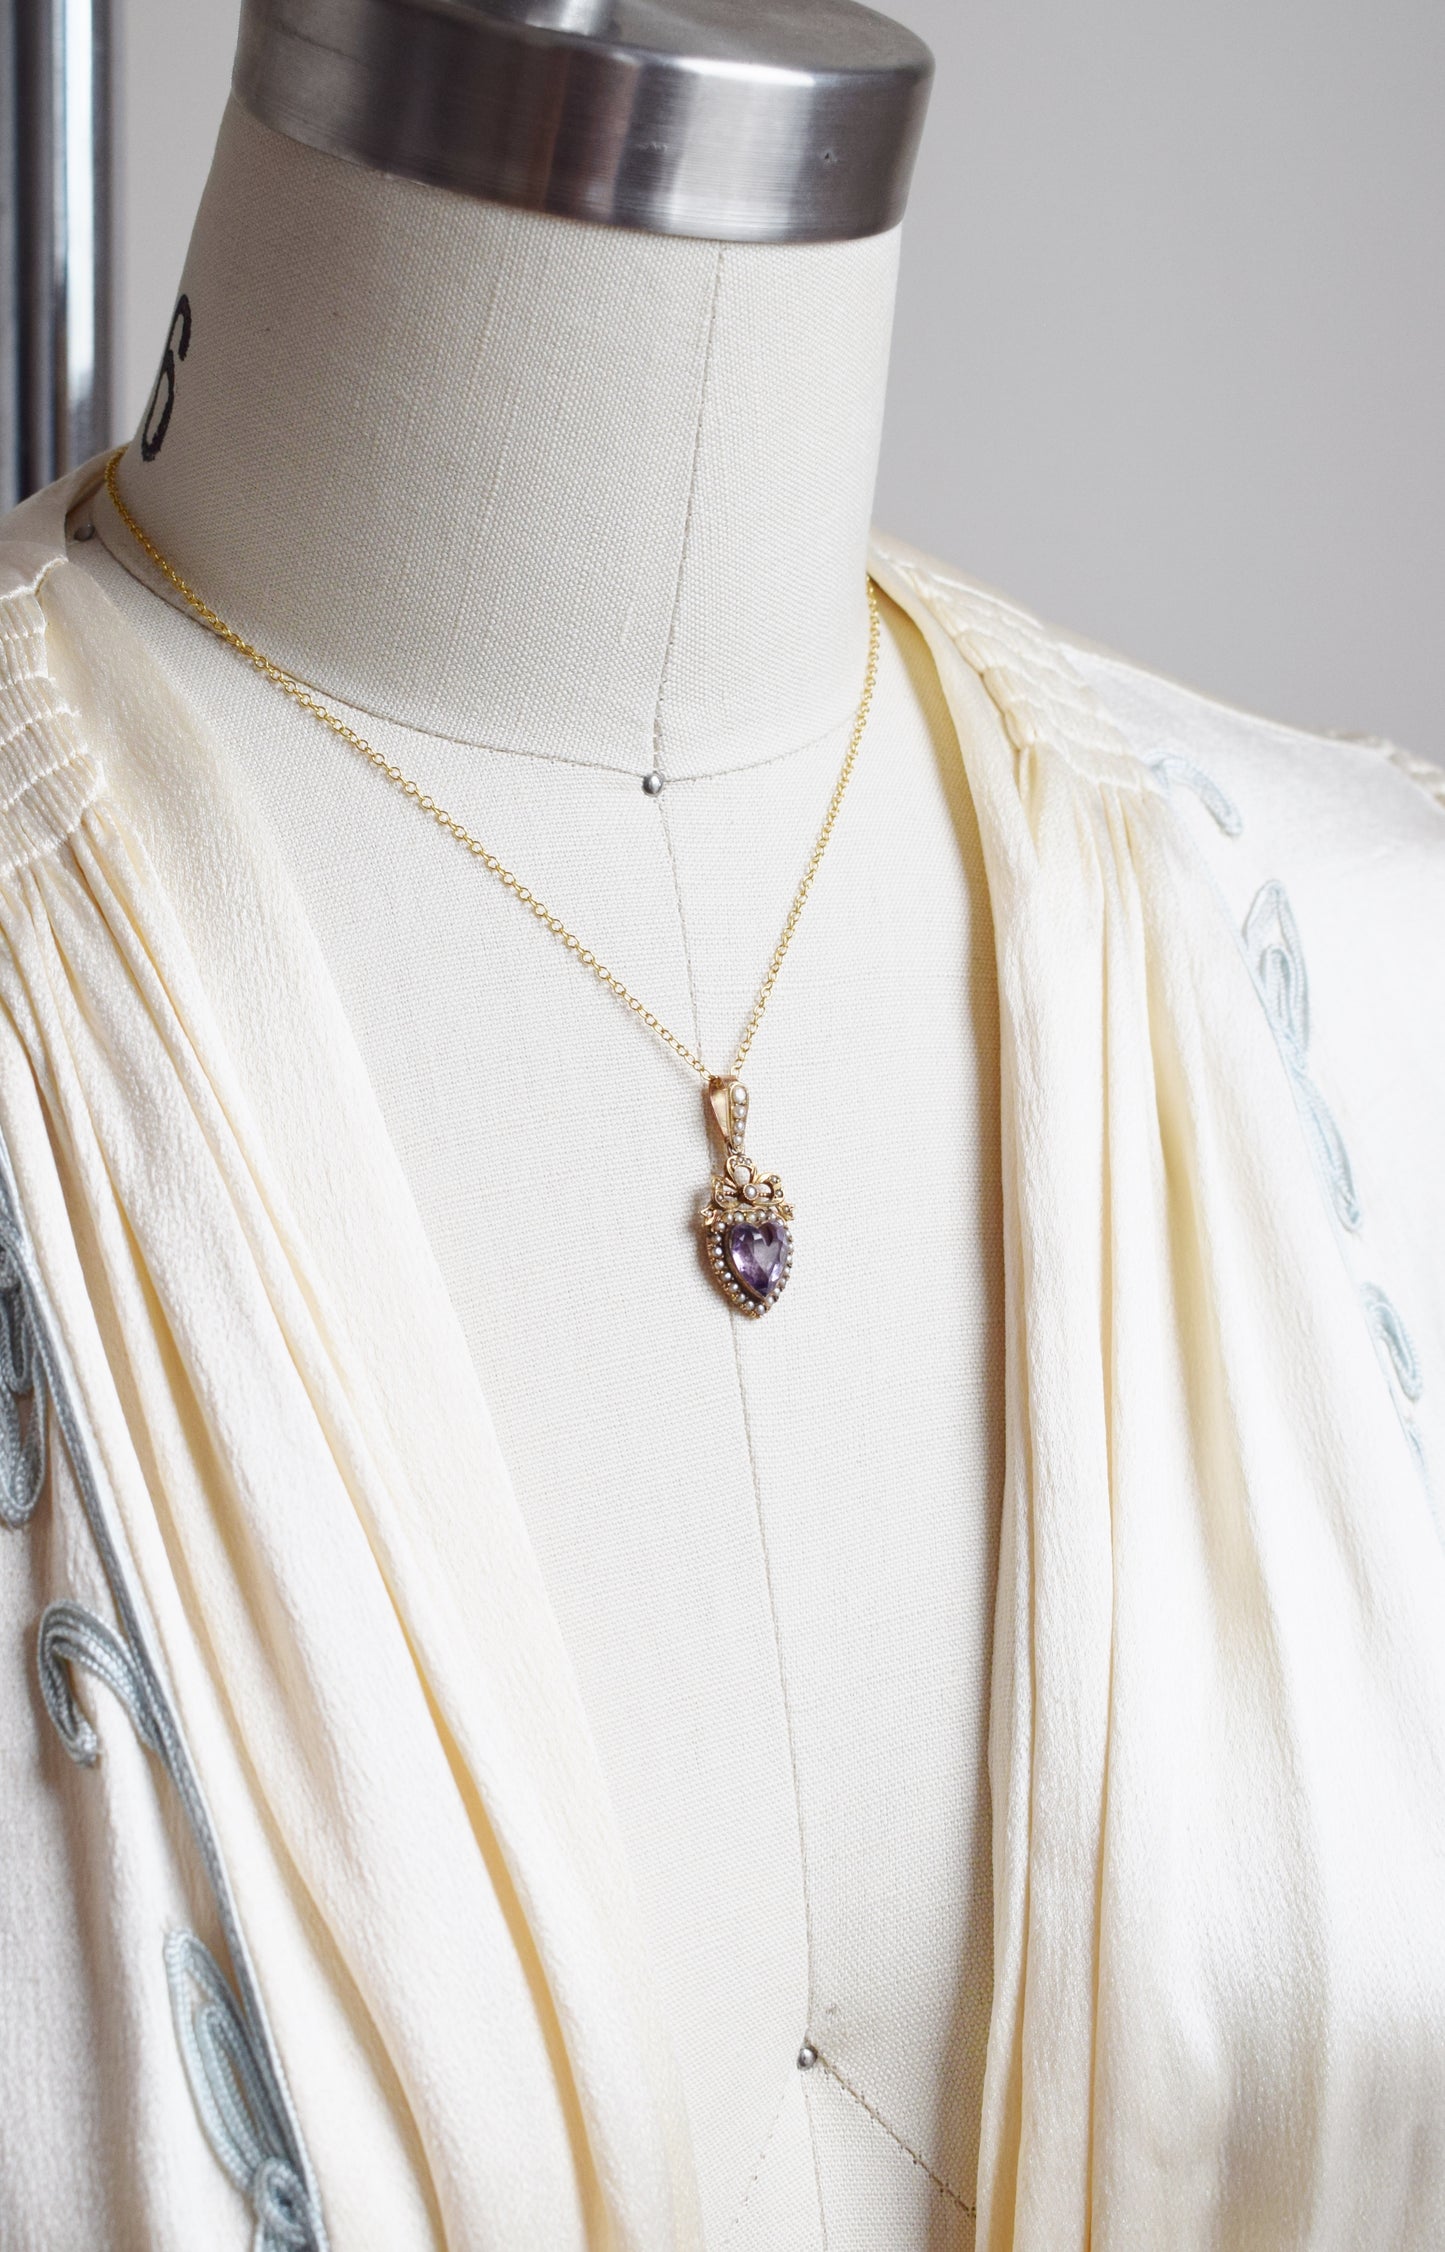 Victorian 9kt Gold, Amethyst and Seed Pearl Heart Pendant